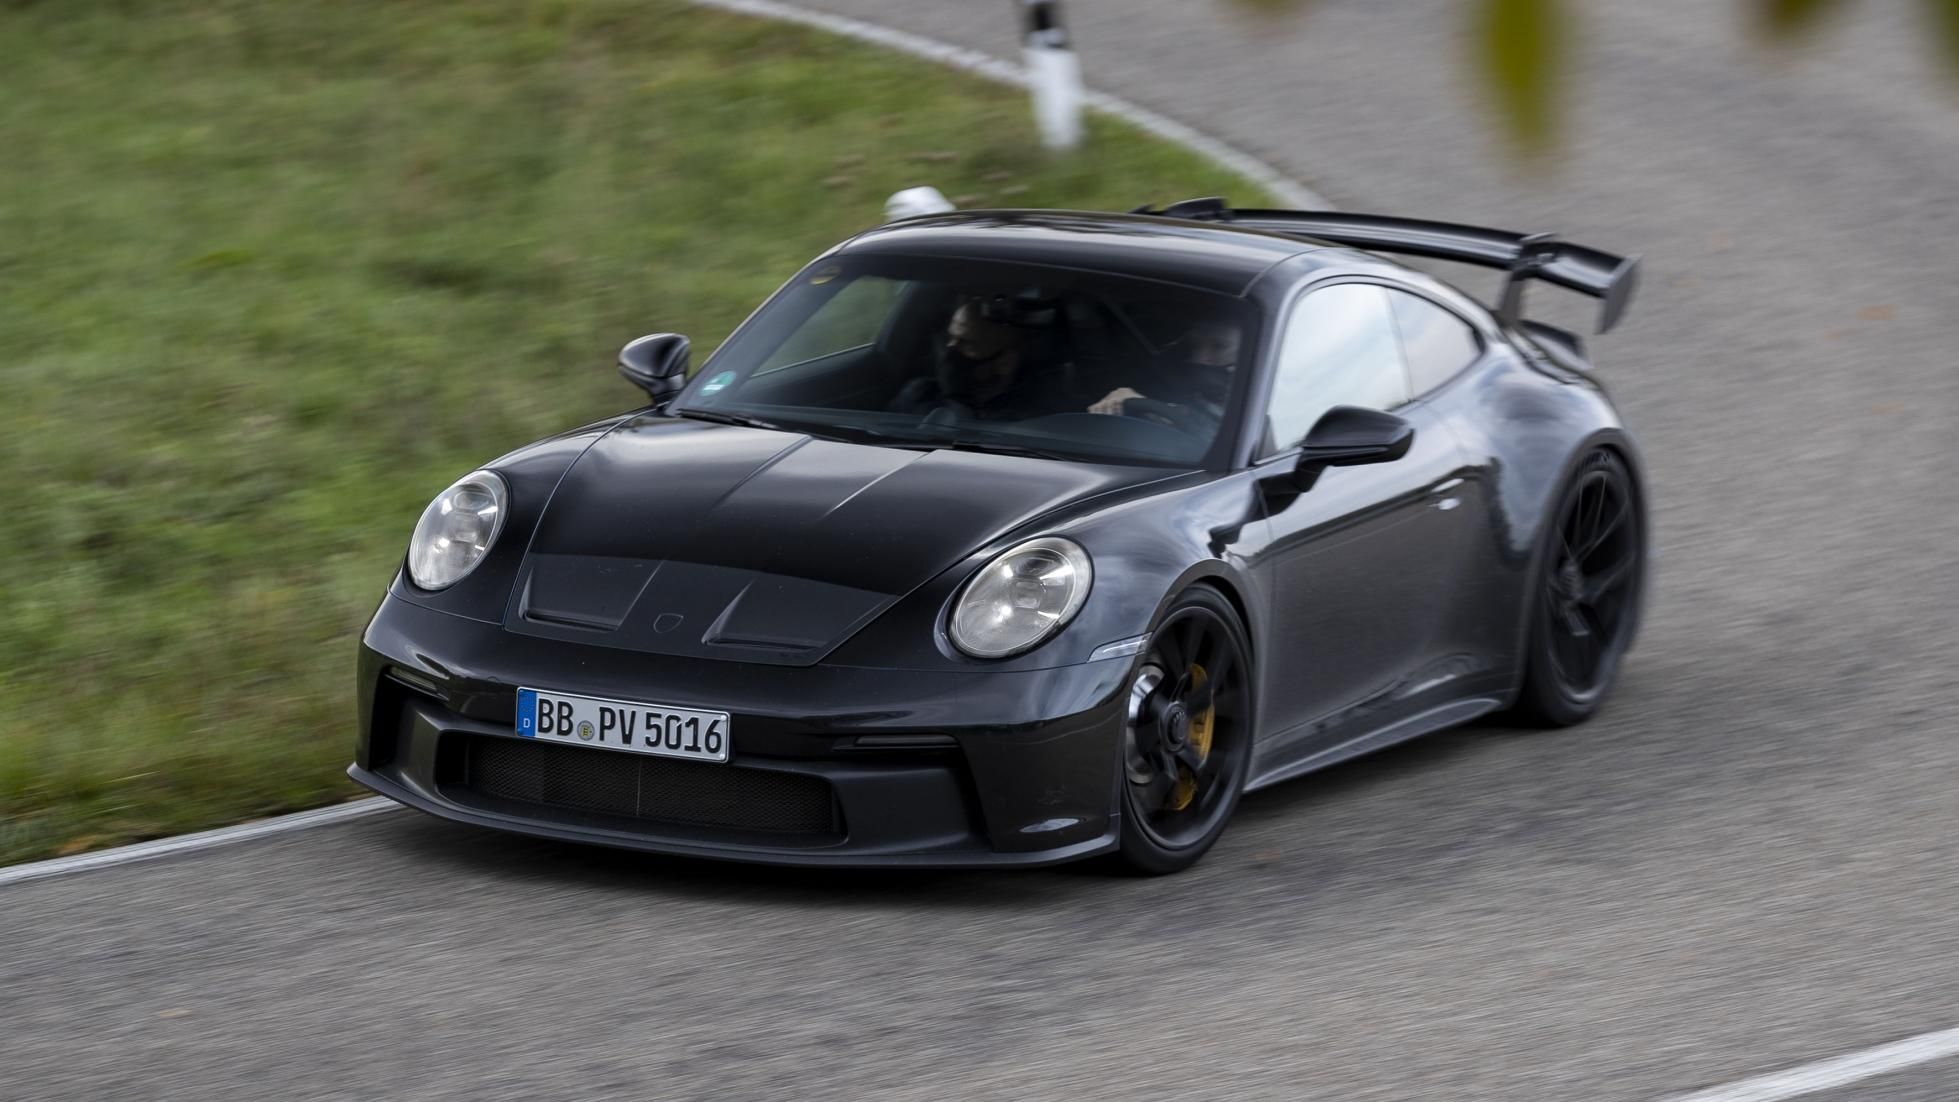 Here Are The Reasons We're Excited About The New Porsche GT3 RS